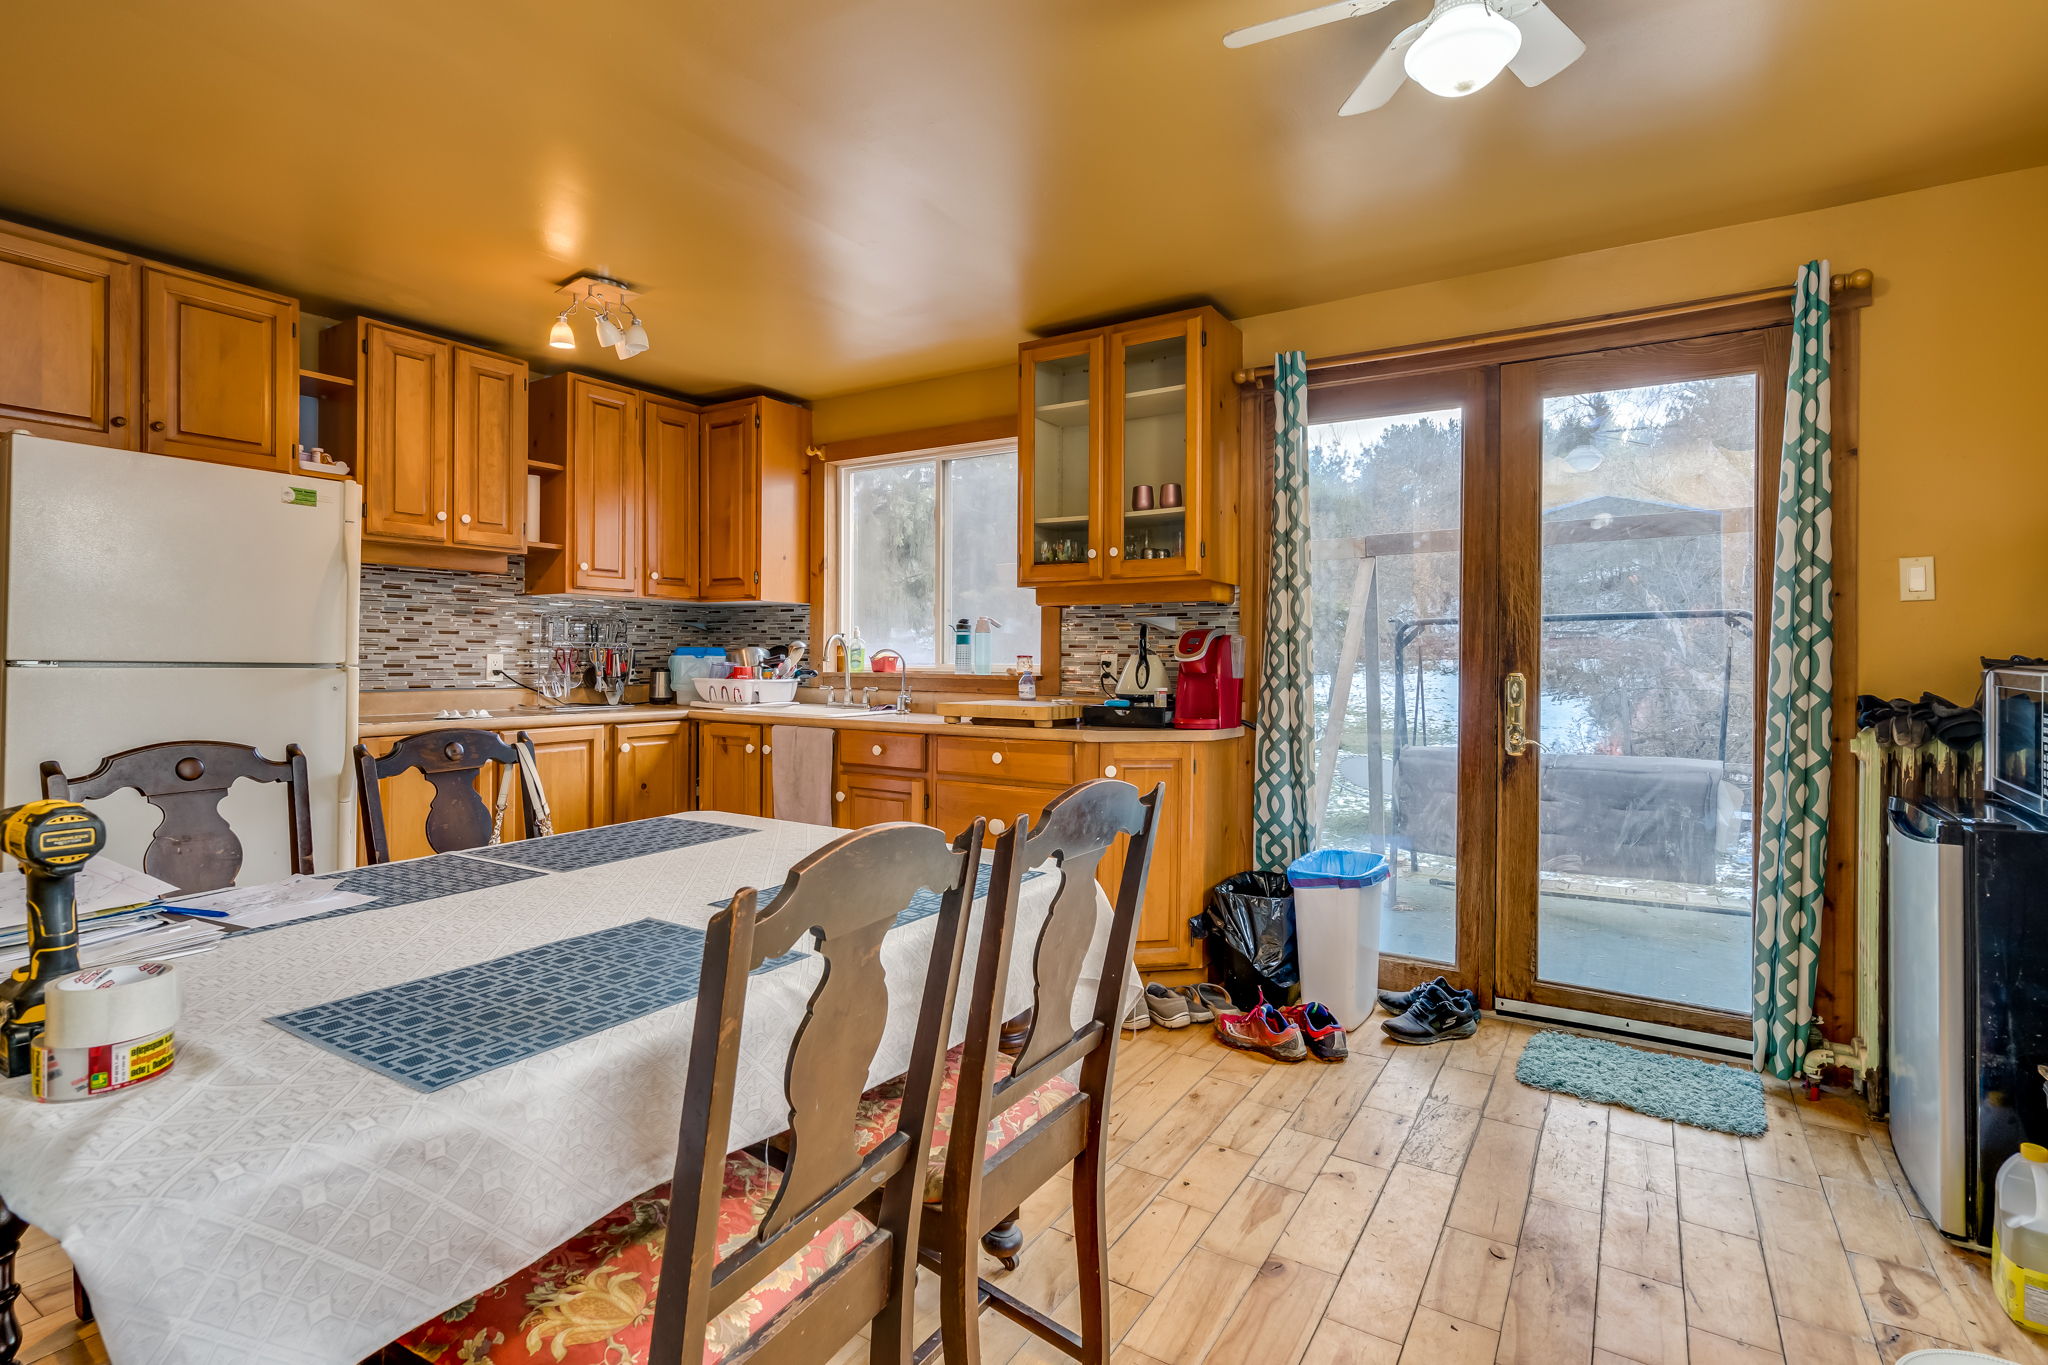  16865 12th Concession, King, ON L0G 1T0, US Photo 13